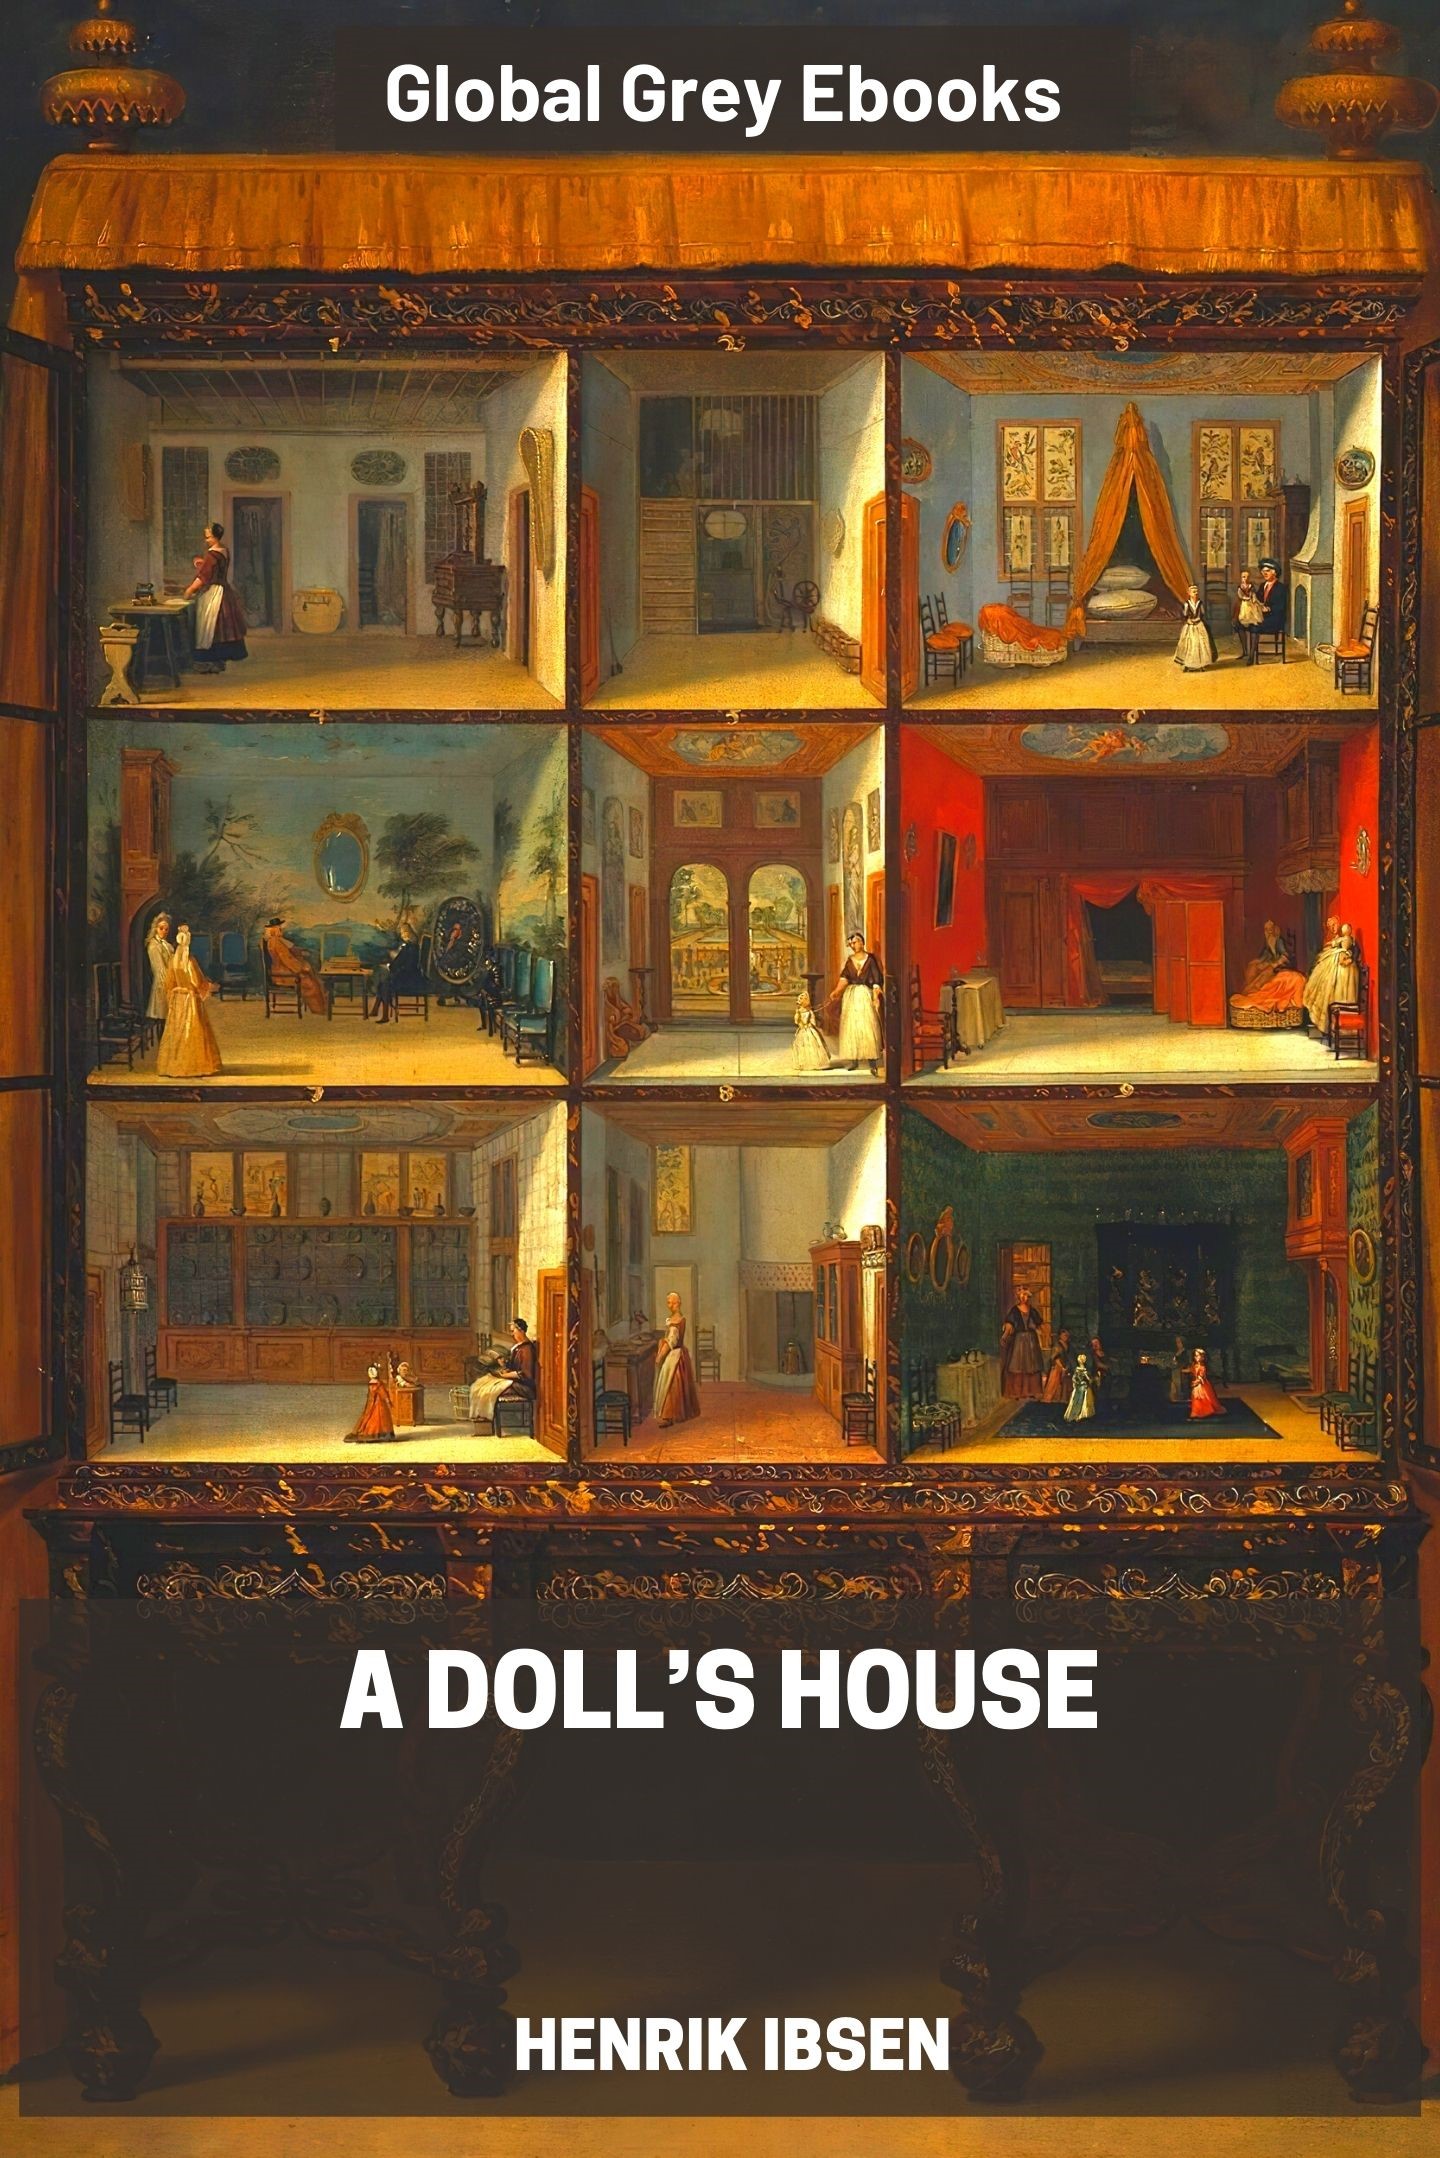 A Doll's House: Character Analysis - eNotes.com